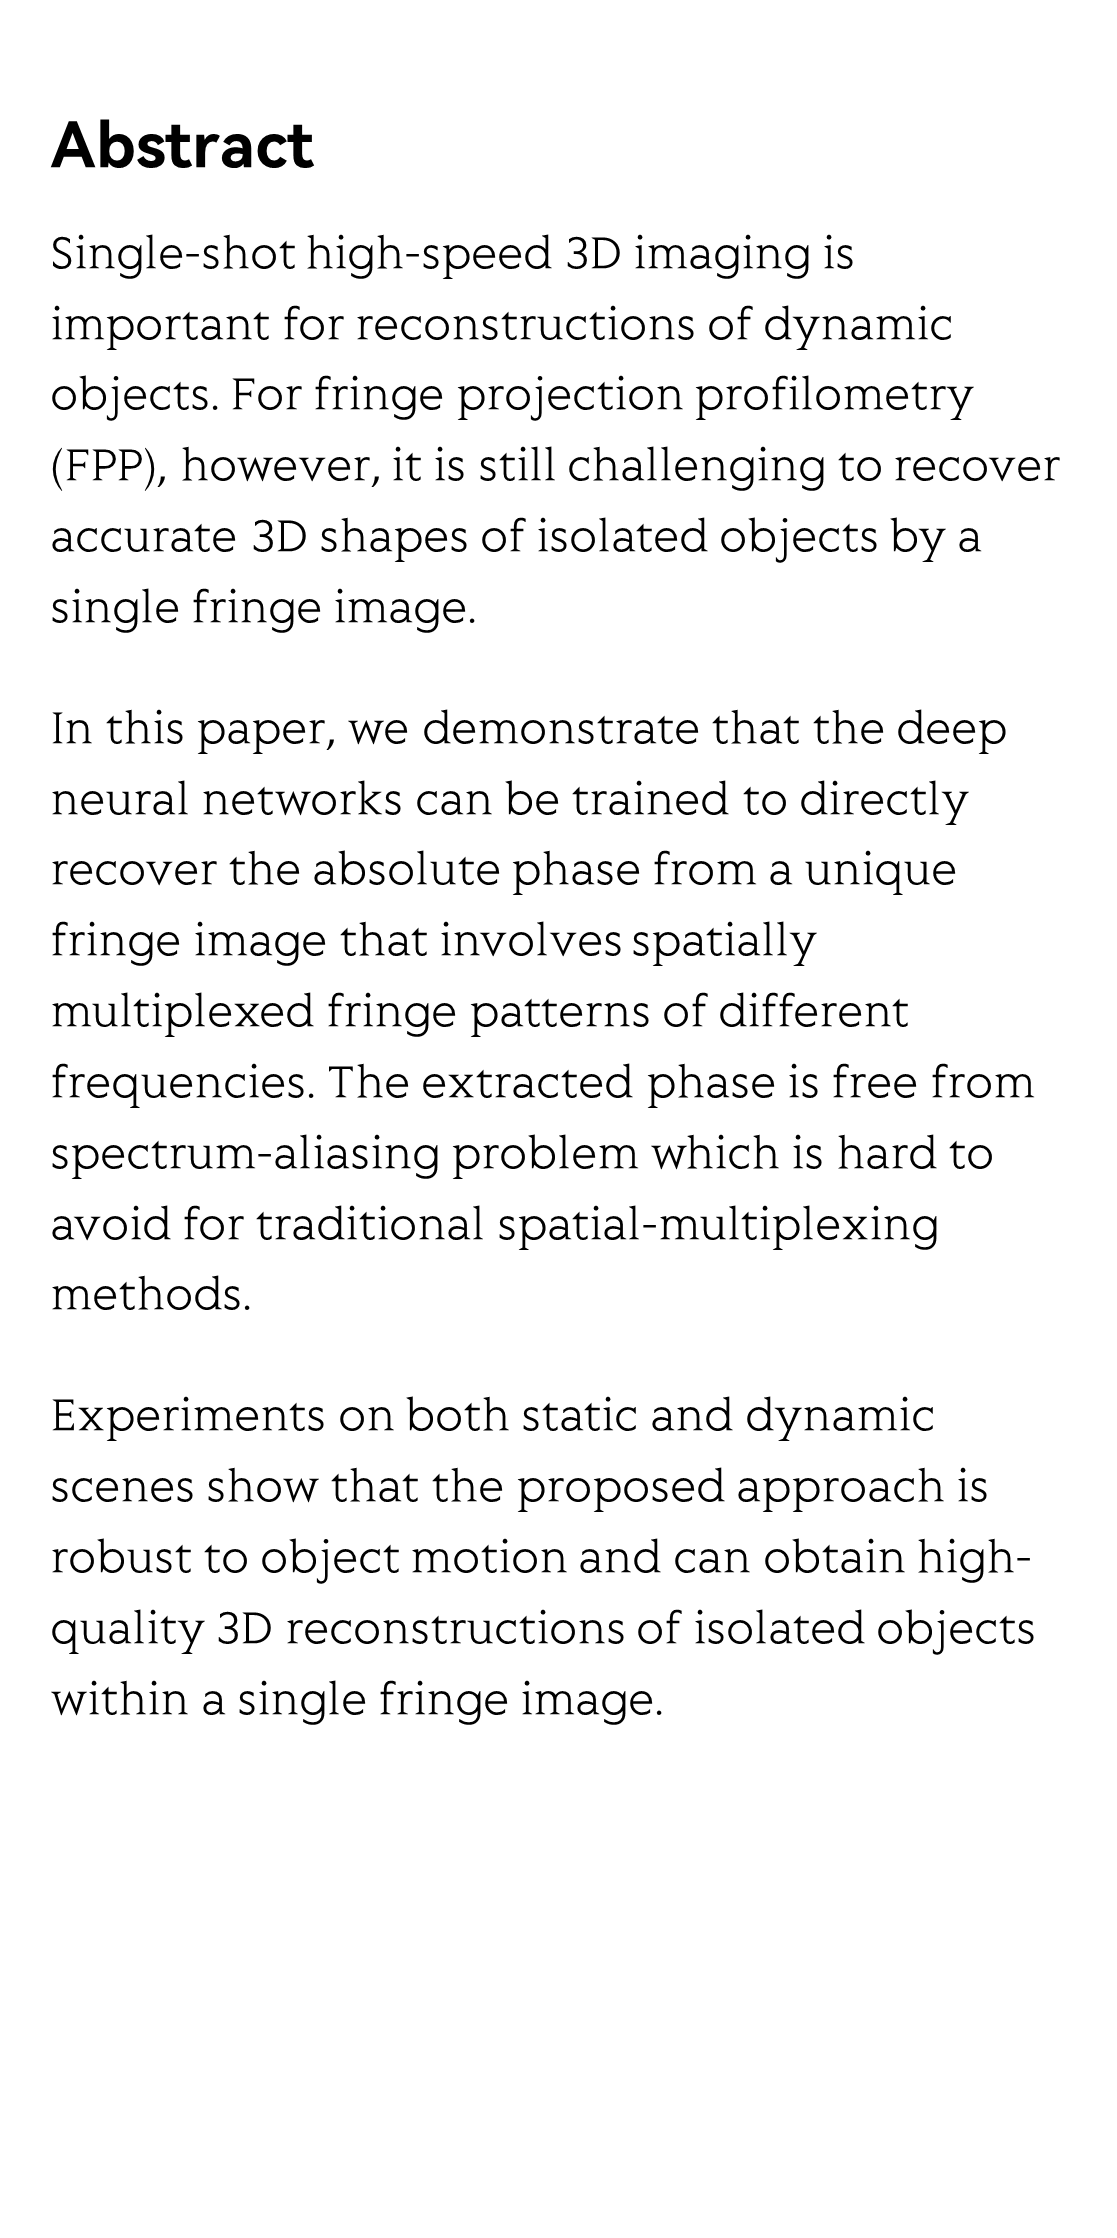 Deep-learning-enabled dual-frequency composite fringe projection profilometry for single-shot absolute 3D shape measurement_2